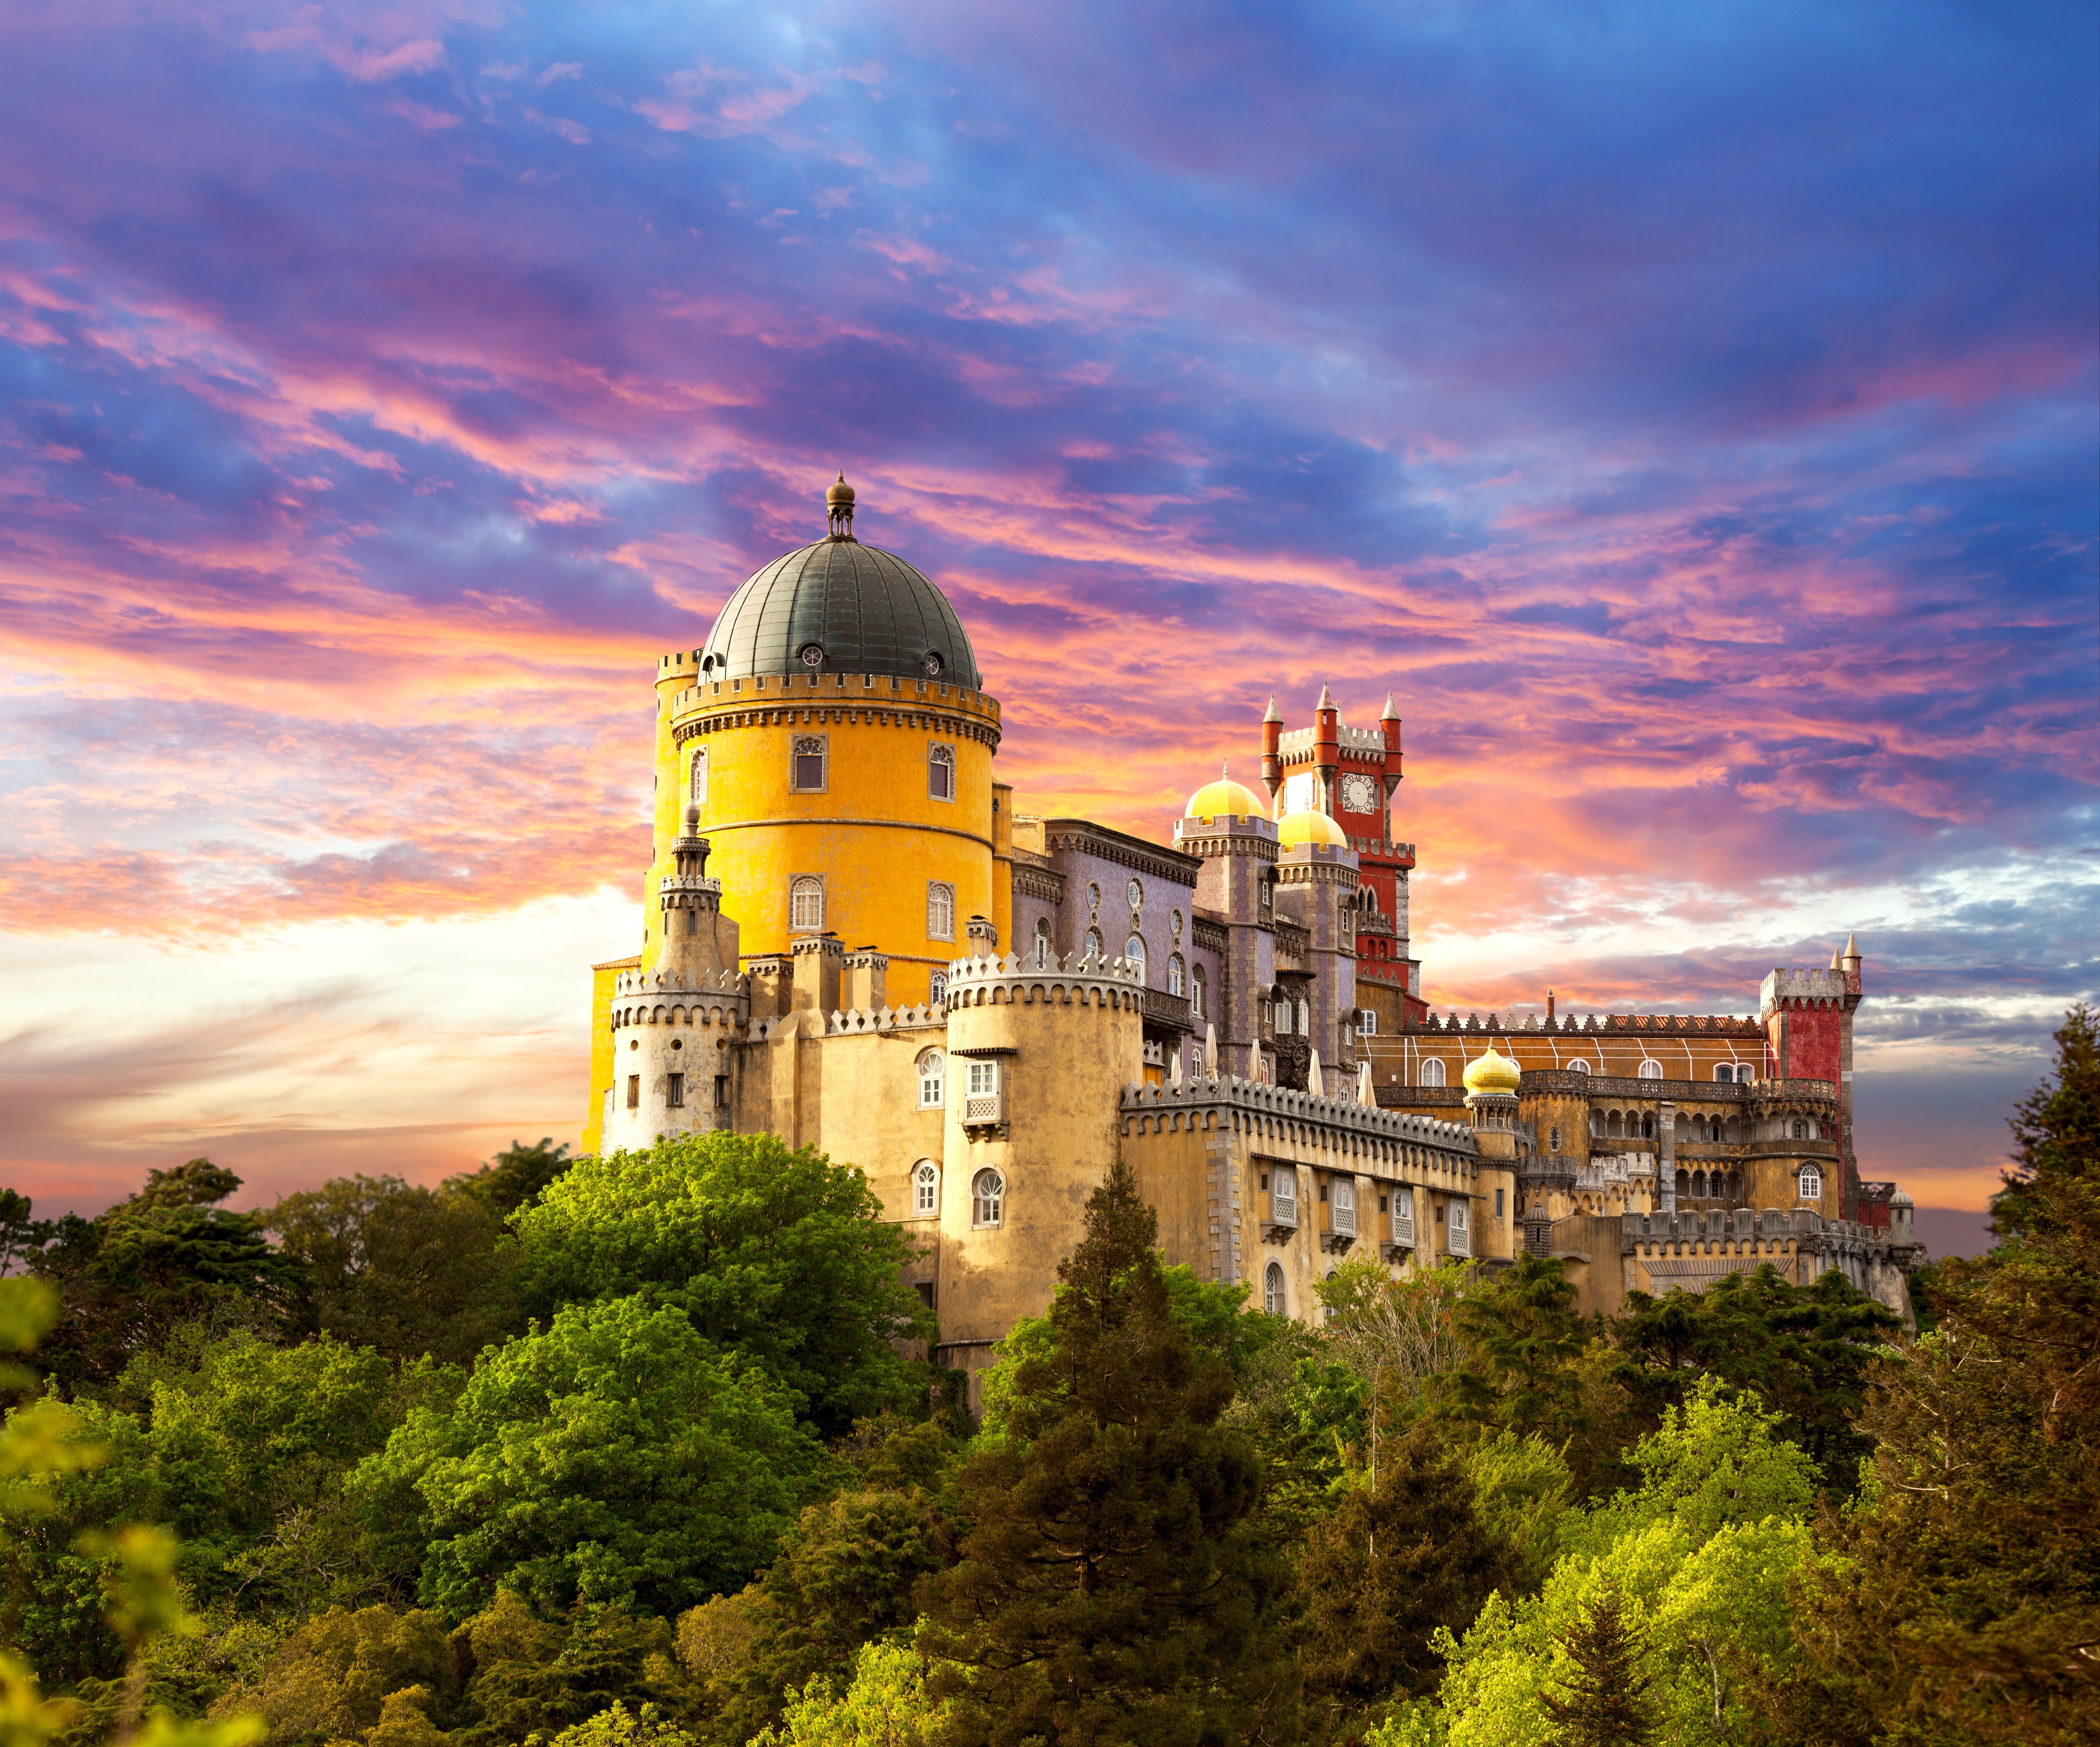 General 5050x4200 architecture nature clouds building castle trees sunset Portugal tower Sintra